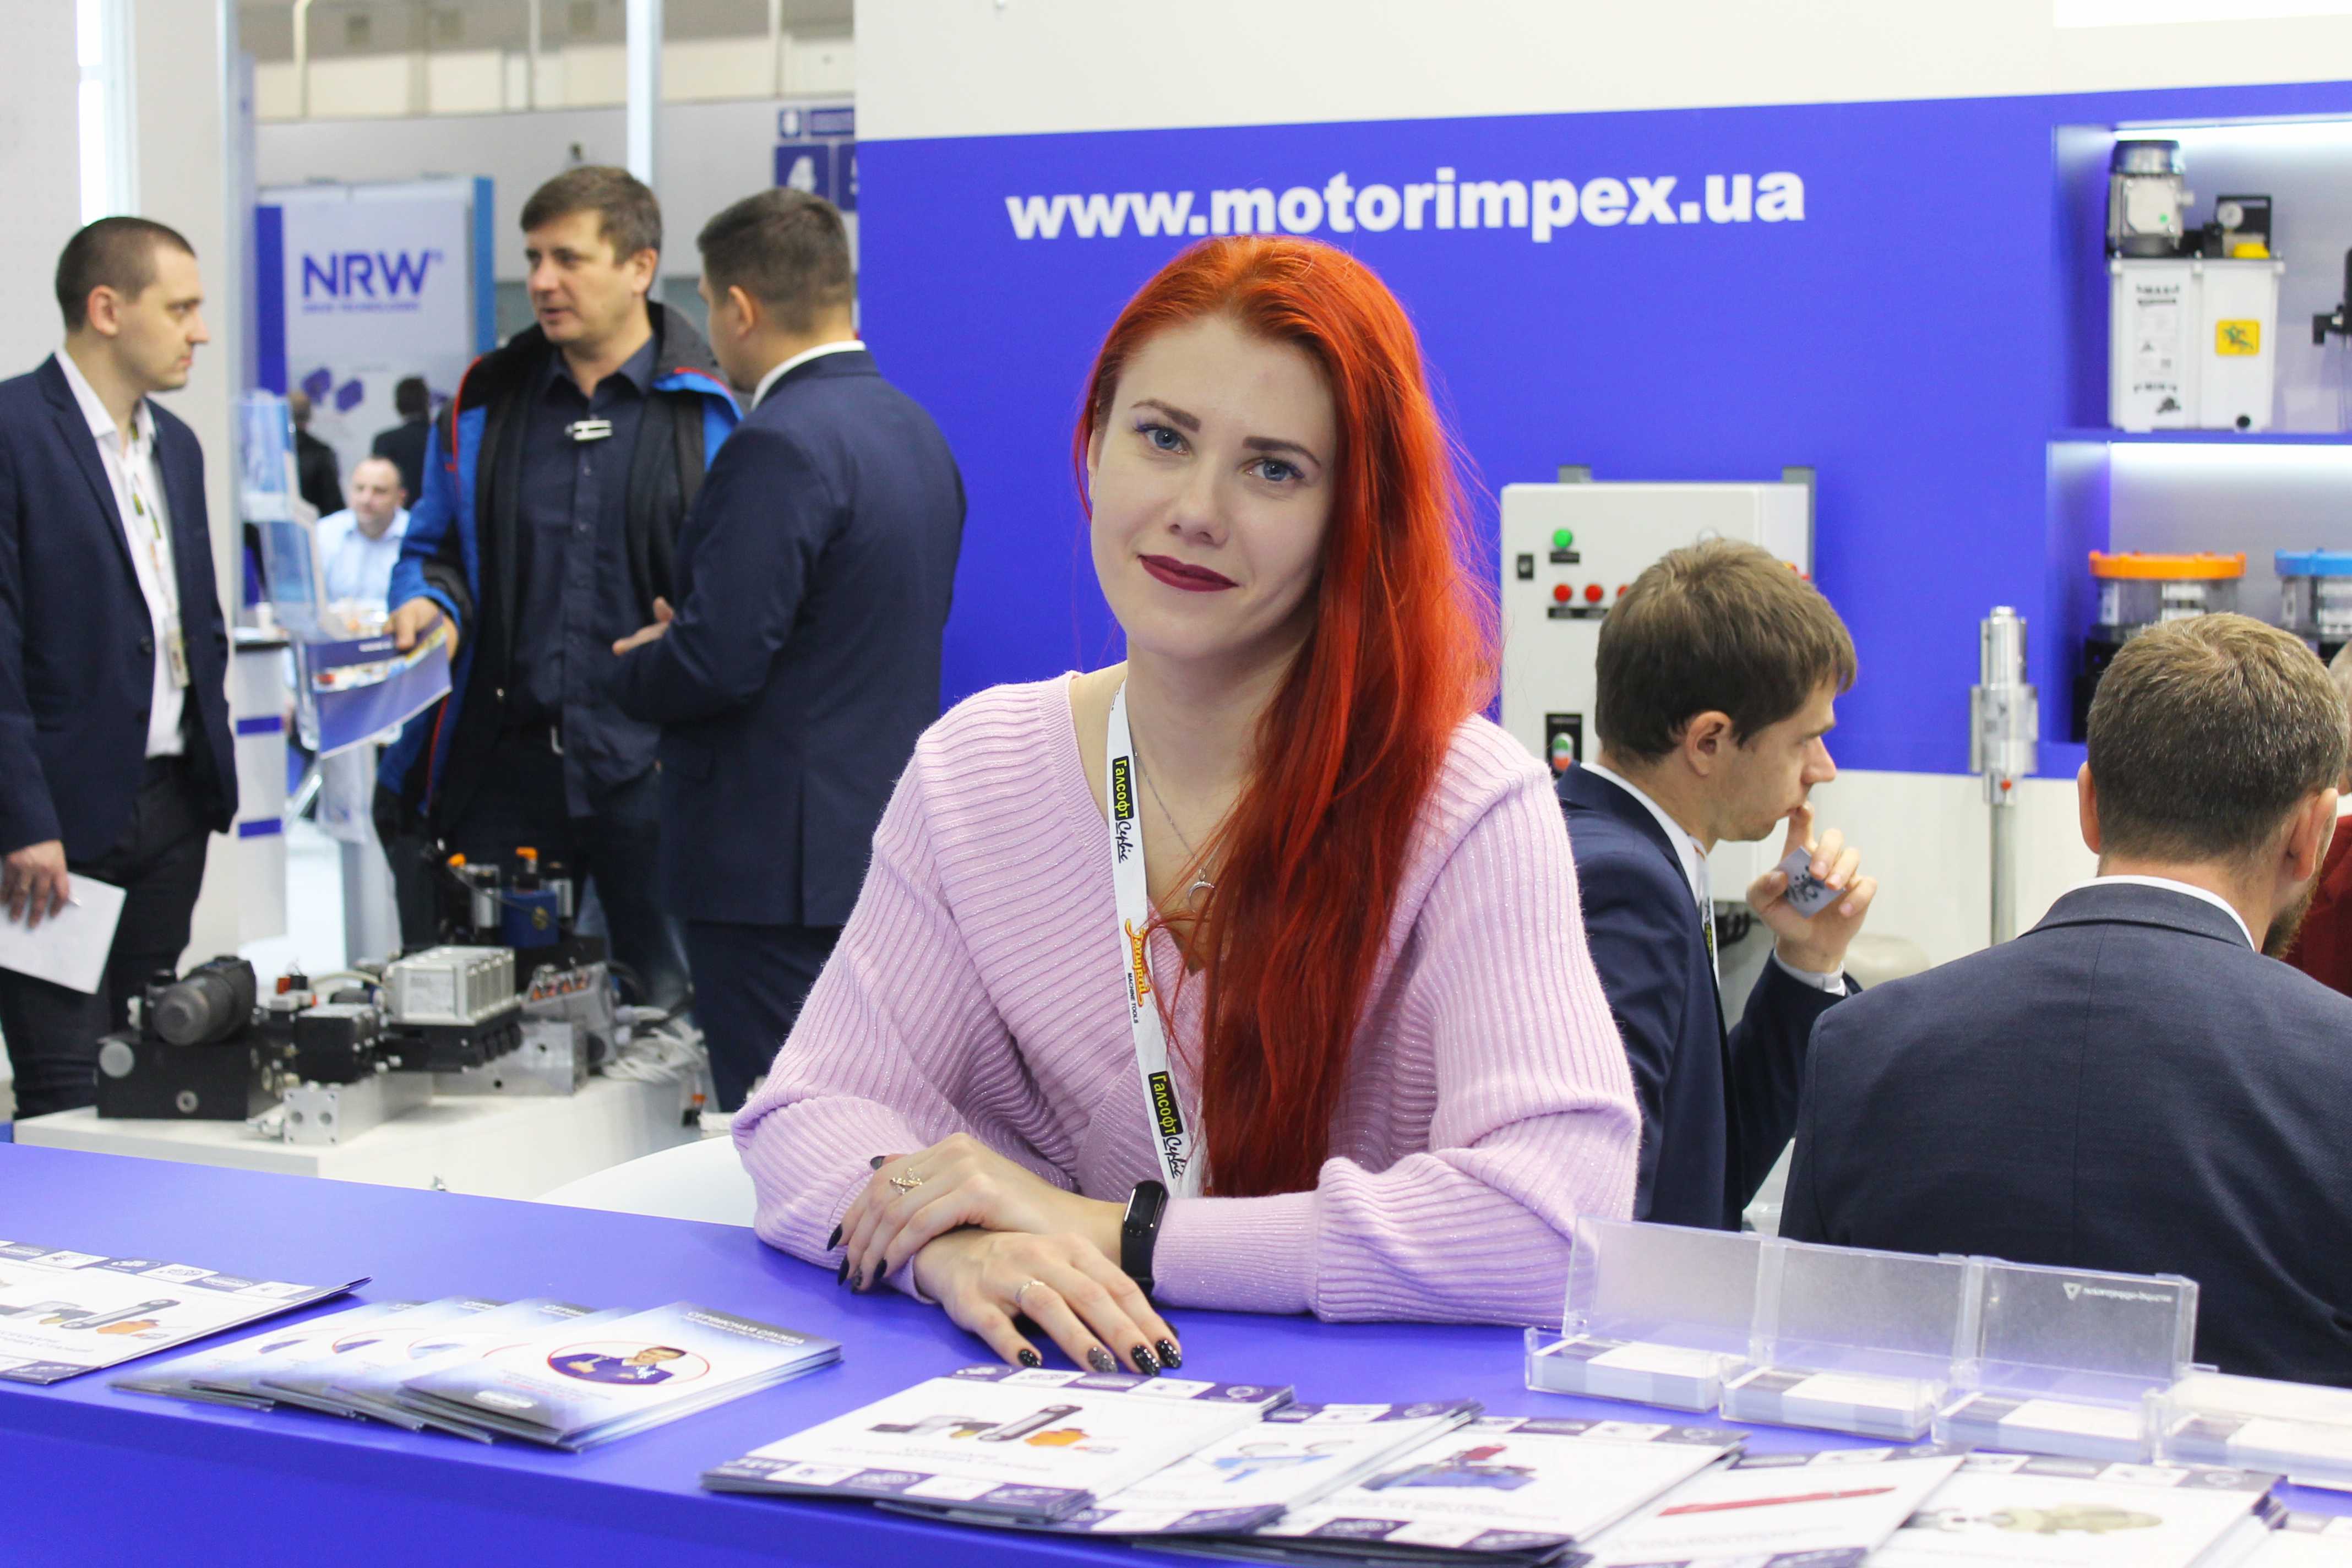 Hydraulics from Motorimpex engineers — Selection and calculations at the Industrial Forum 2019